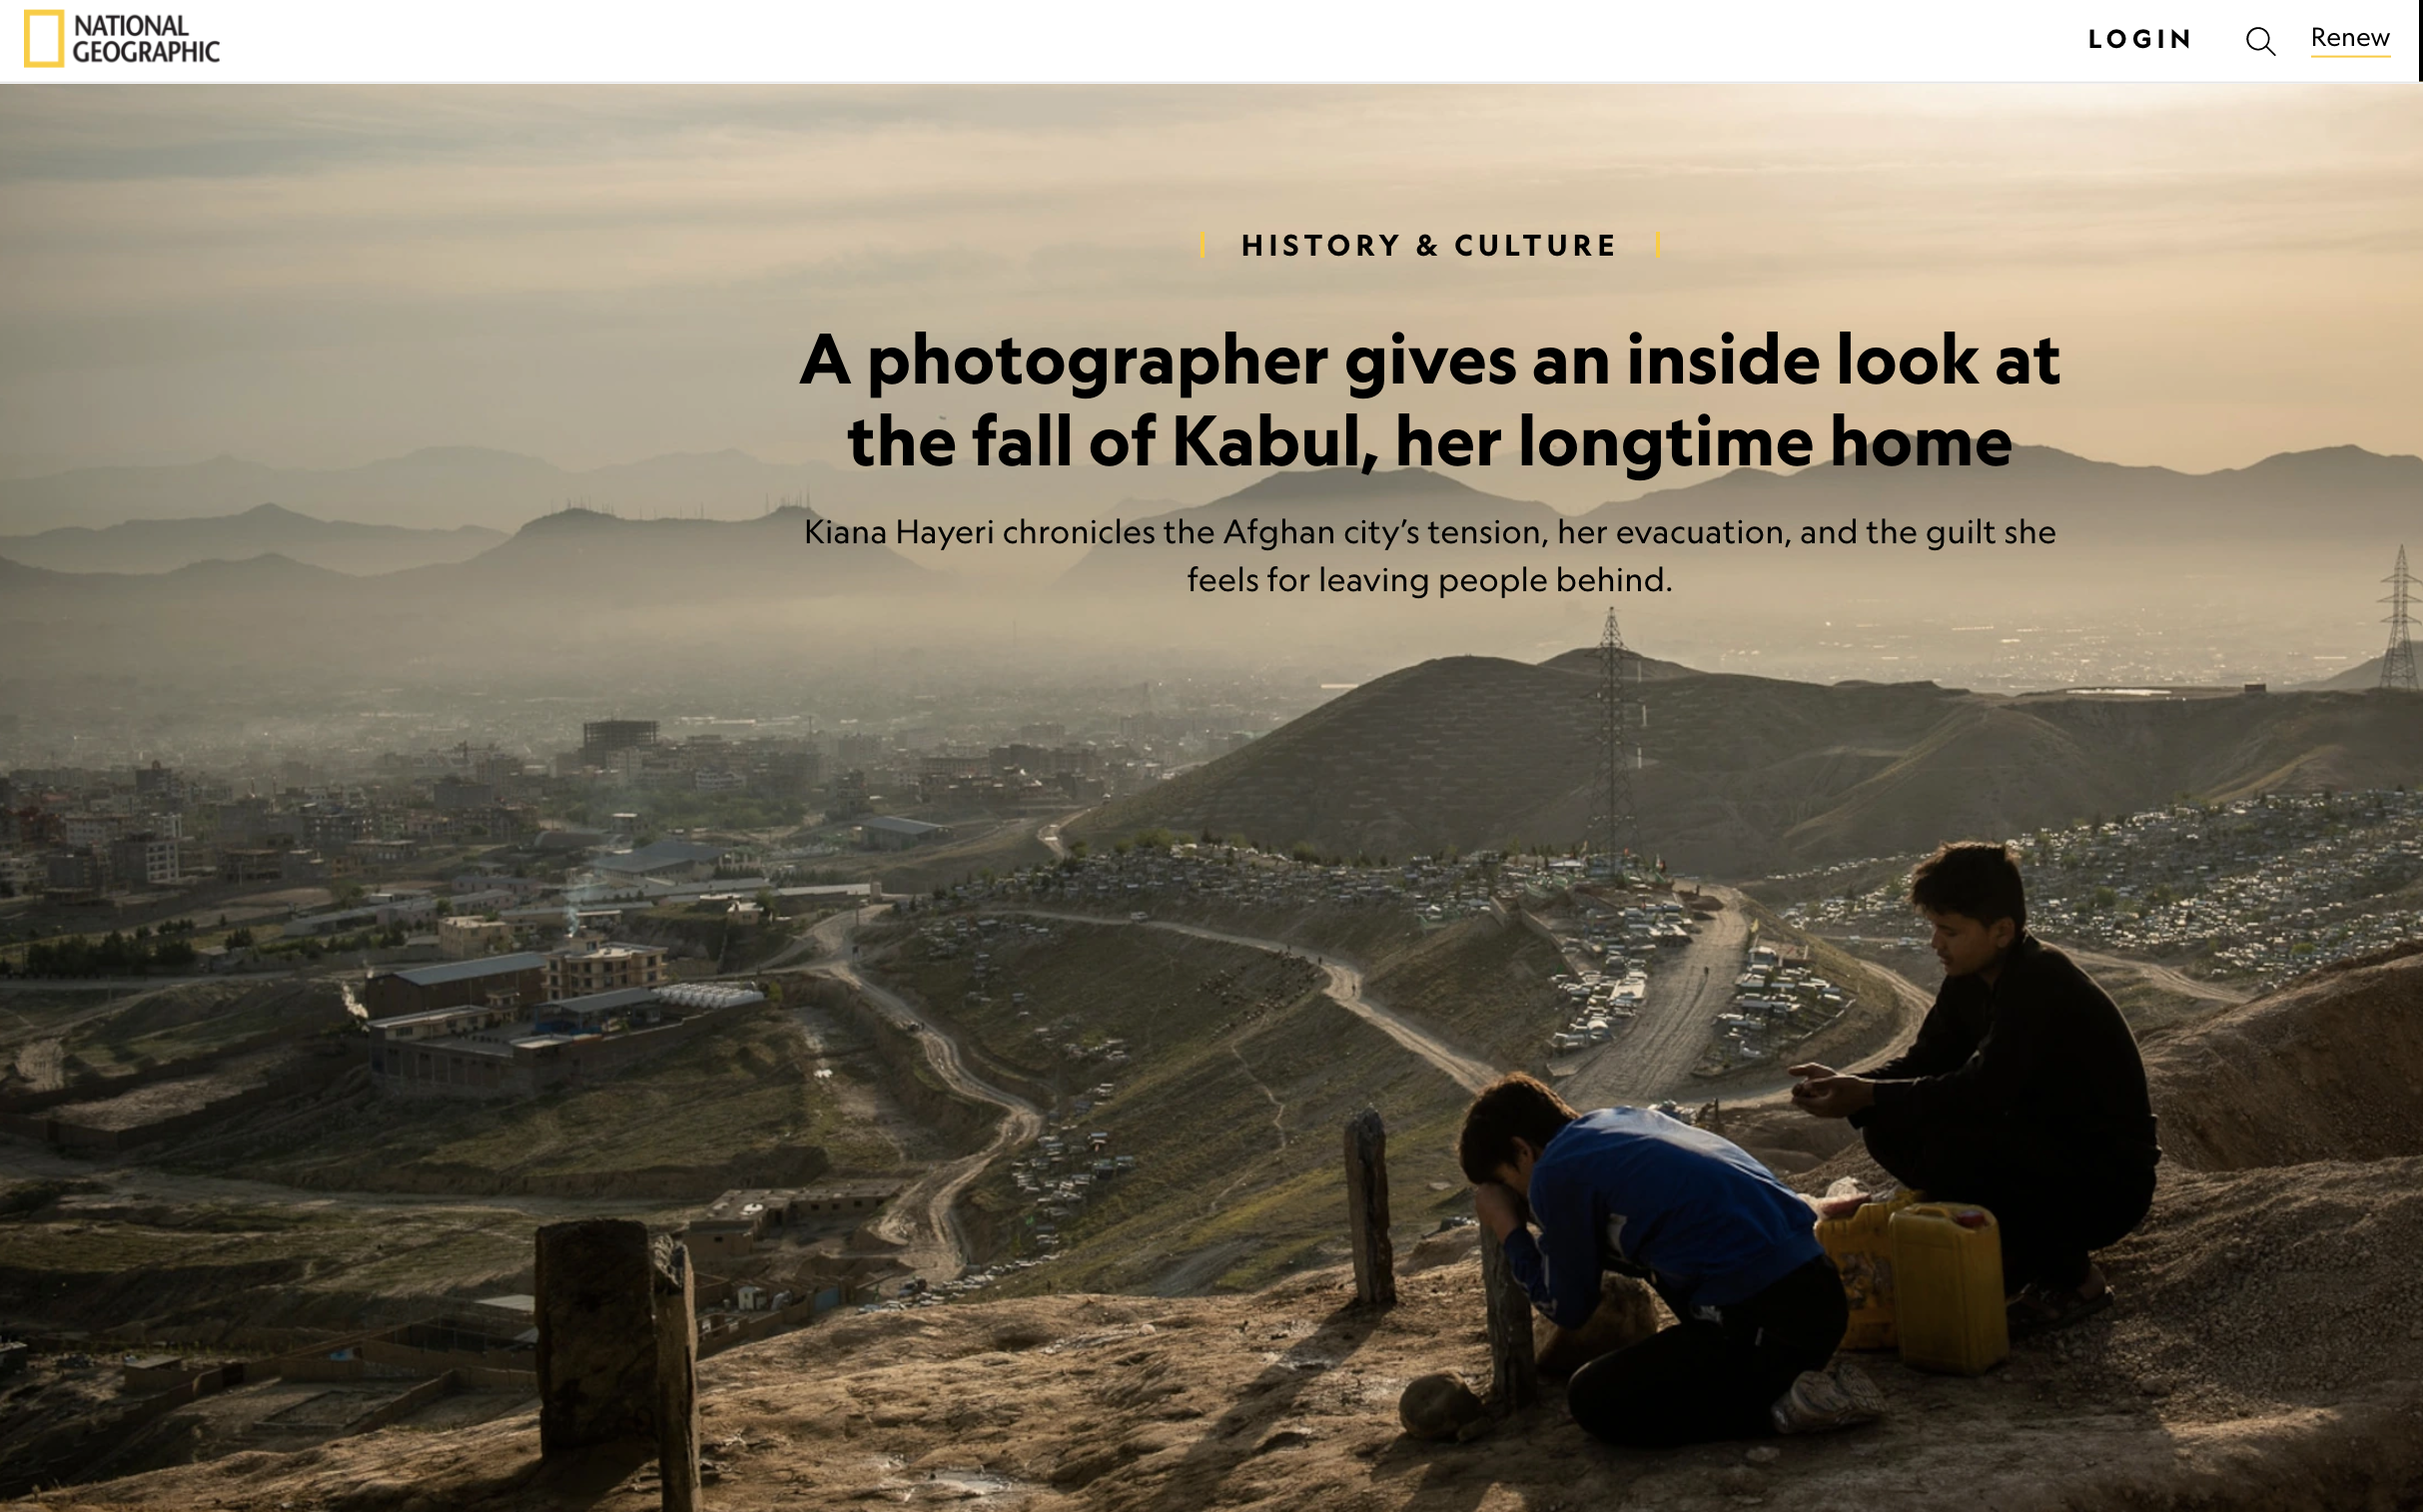 Thumbnail of on National Geographic: A photographer gives an inside look at the fall of Kabul, her longtime home